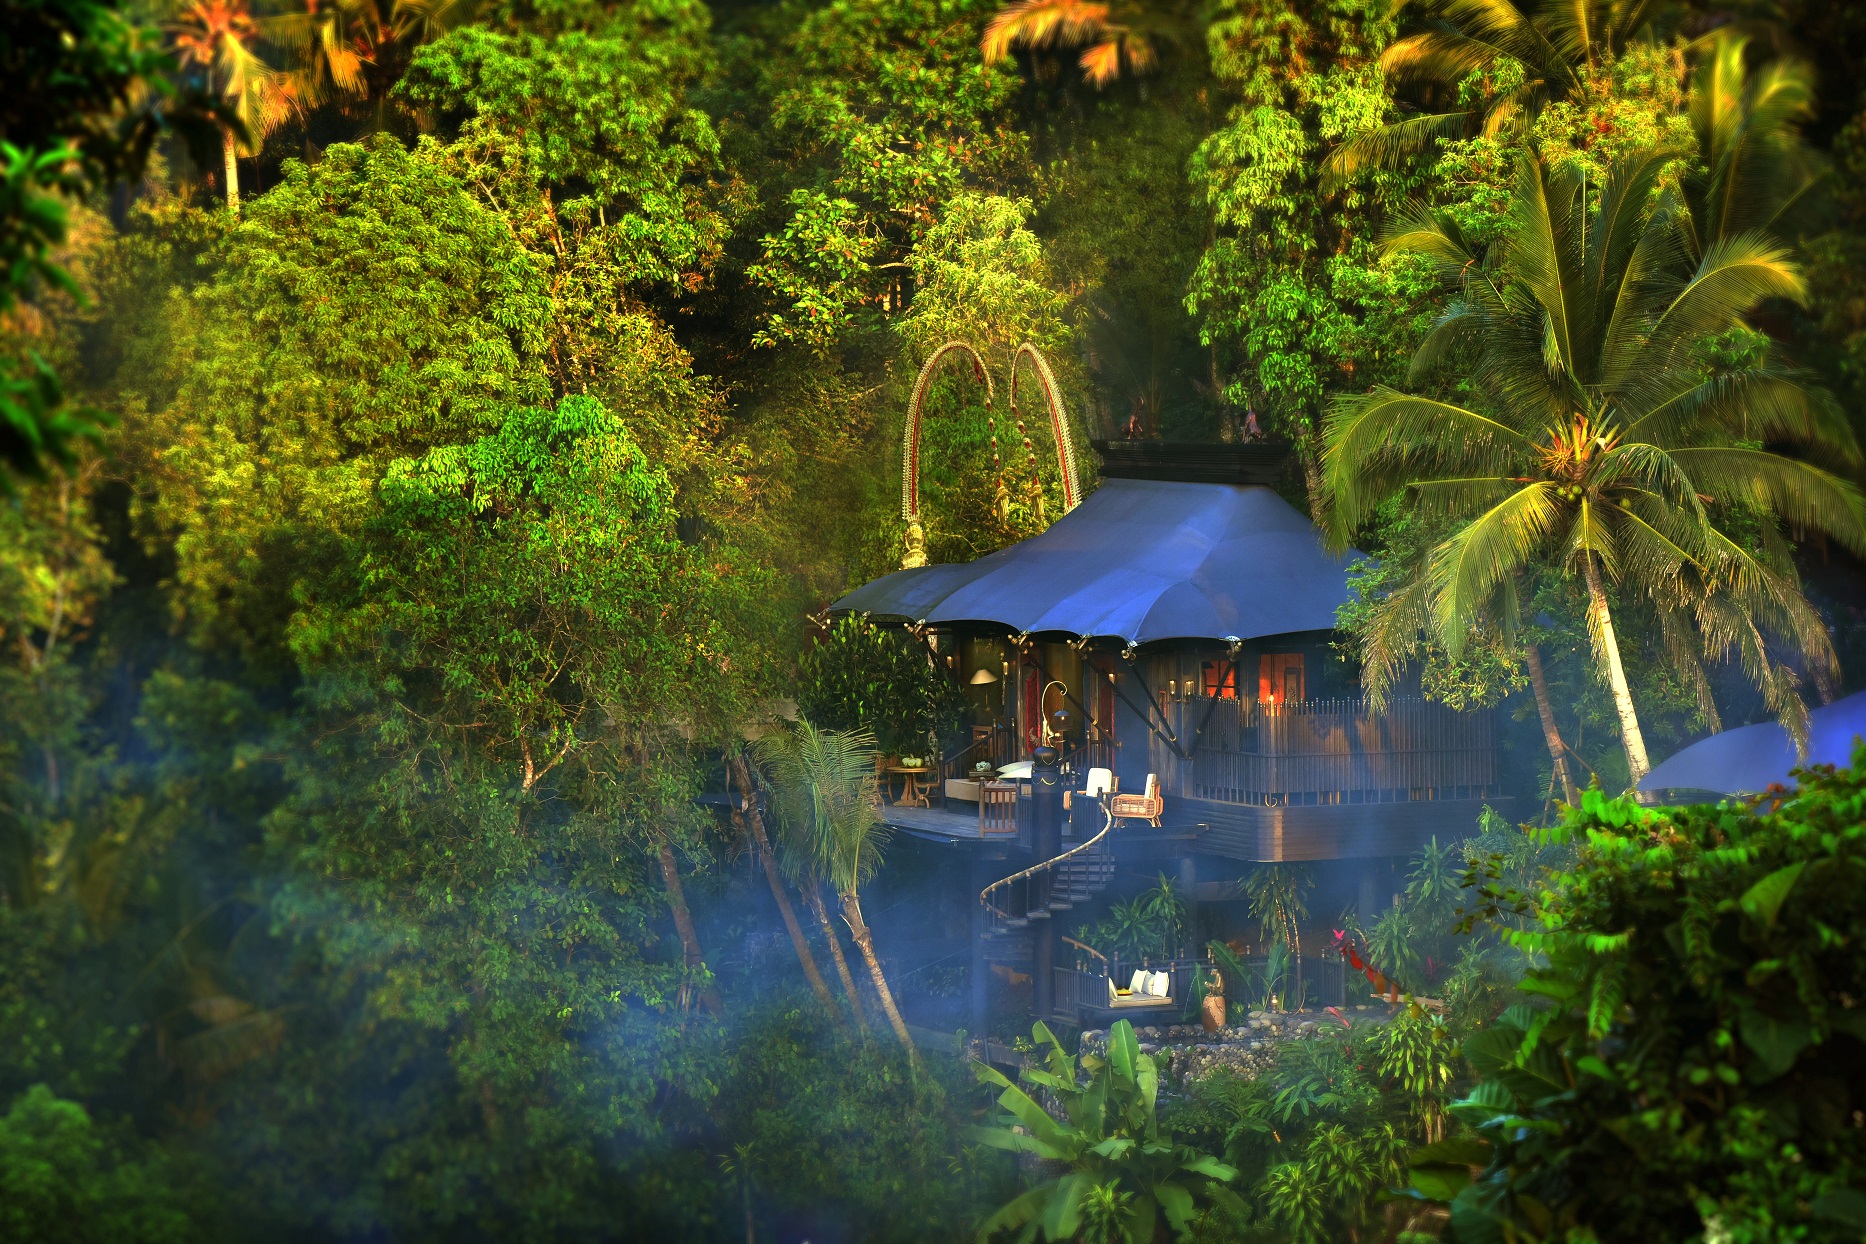 Capella Hotel Group Continues Asian Expansion With Luxury Tented Retreat: Capella Ubud, Bali